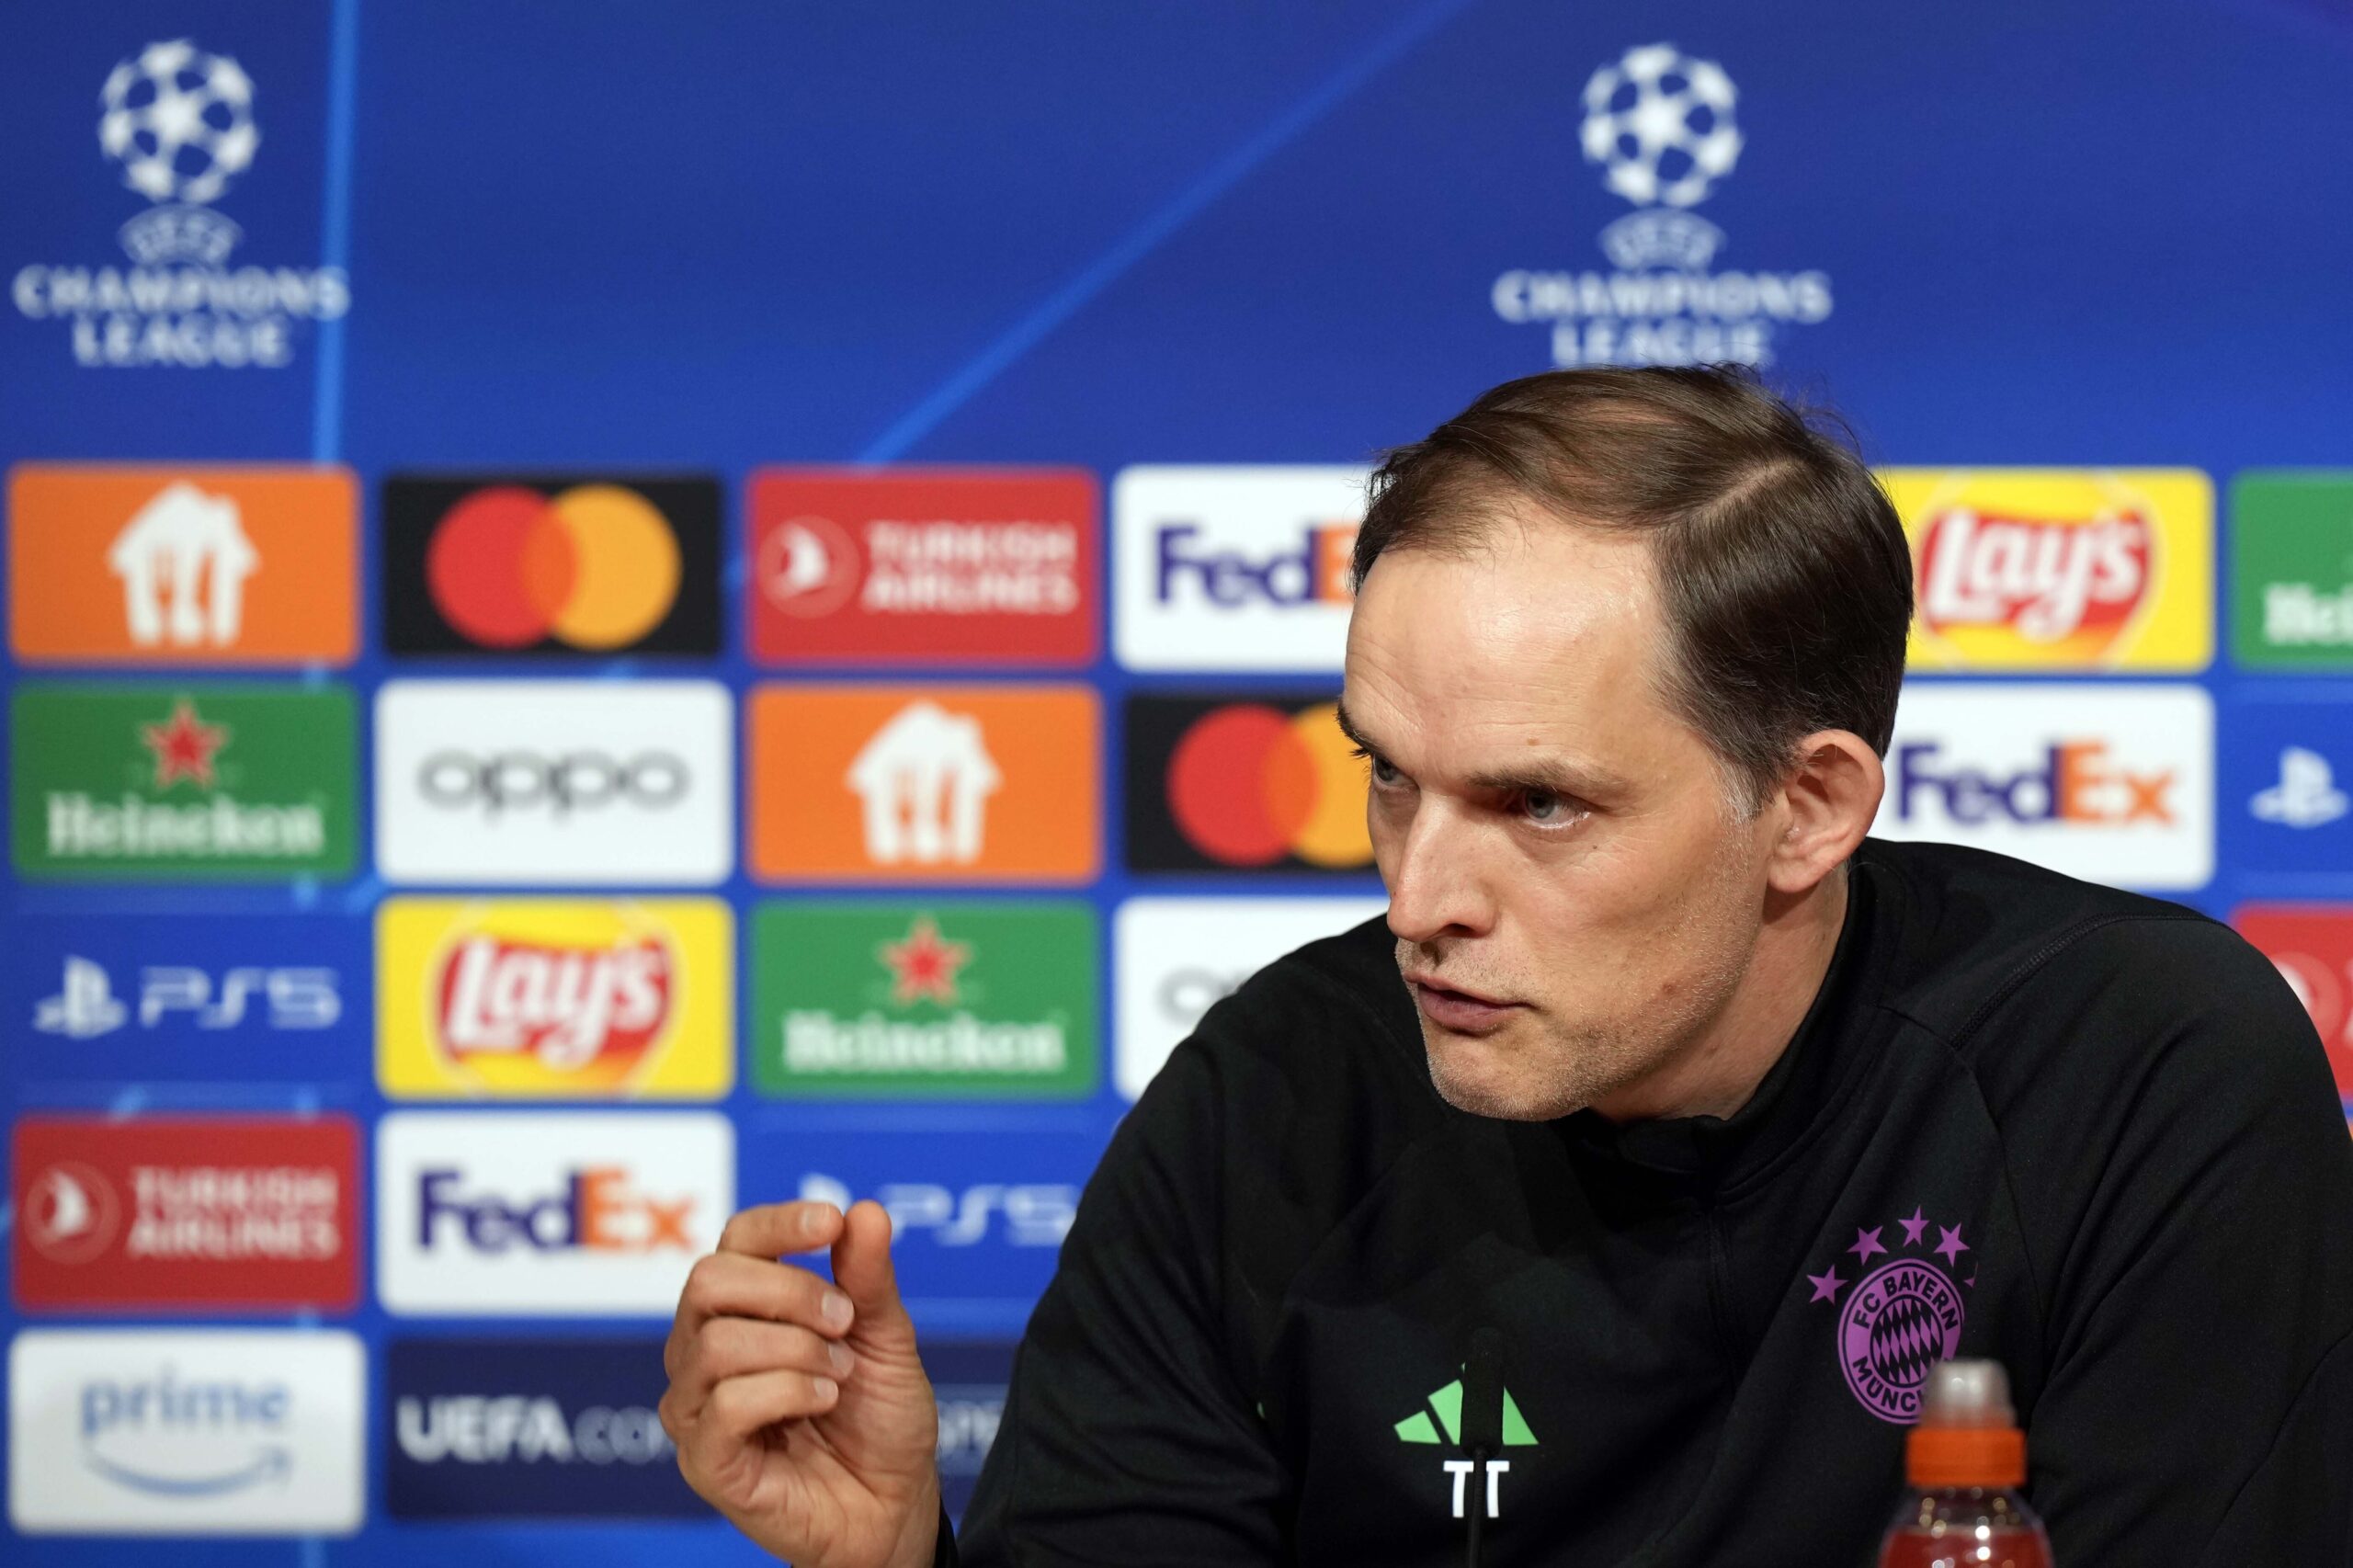 thomas-tuchel-is-already-thinking-about-his-duel-against-real-madrid:-“ancelotti-is-a-legend”